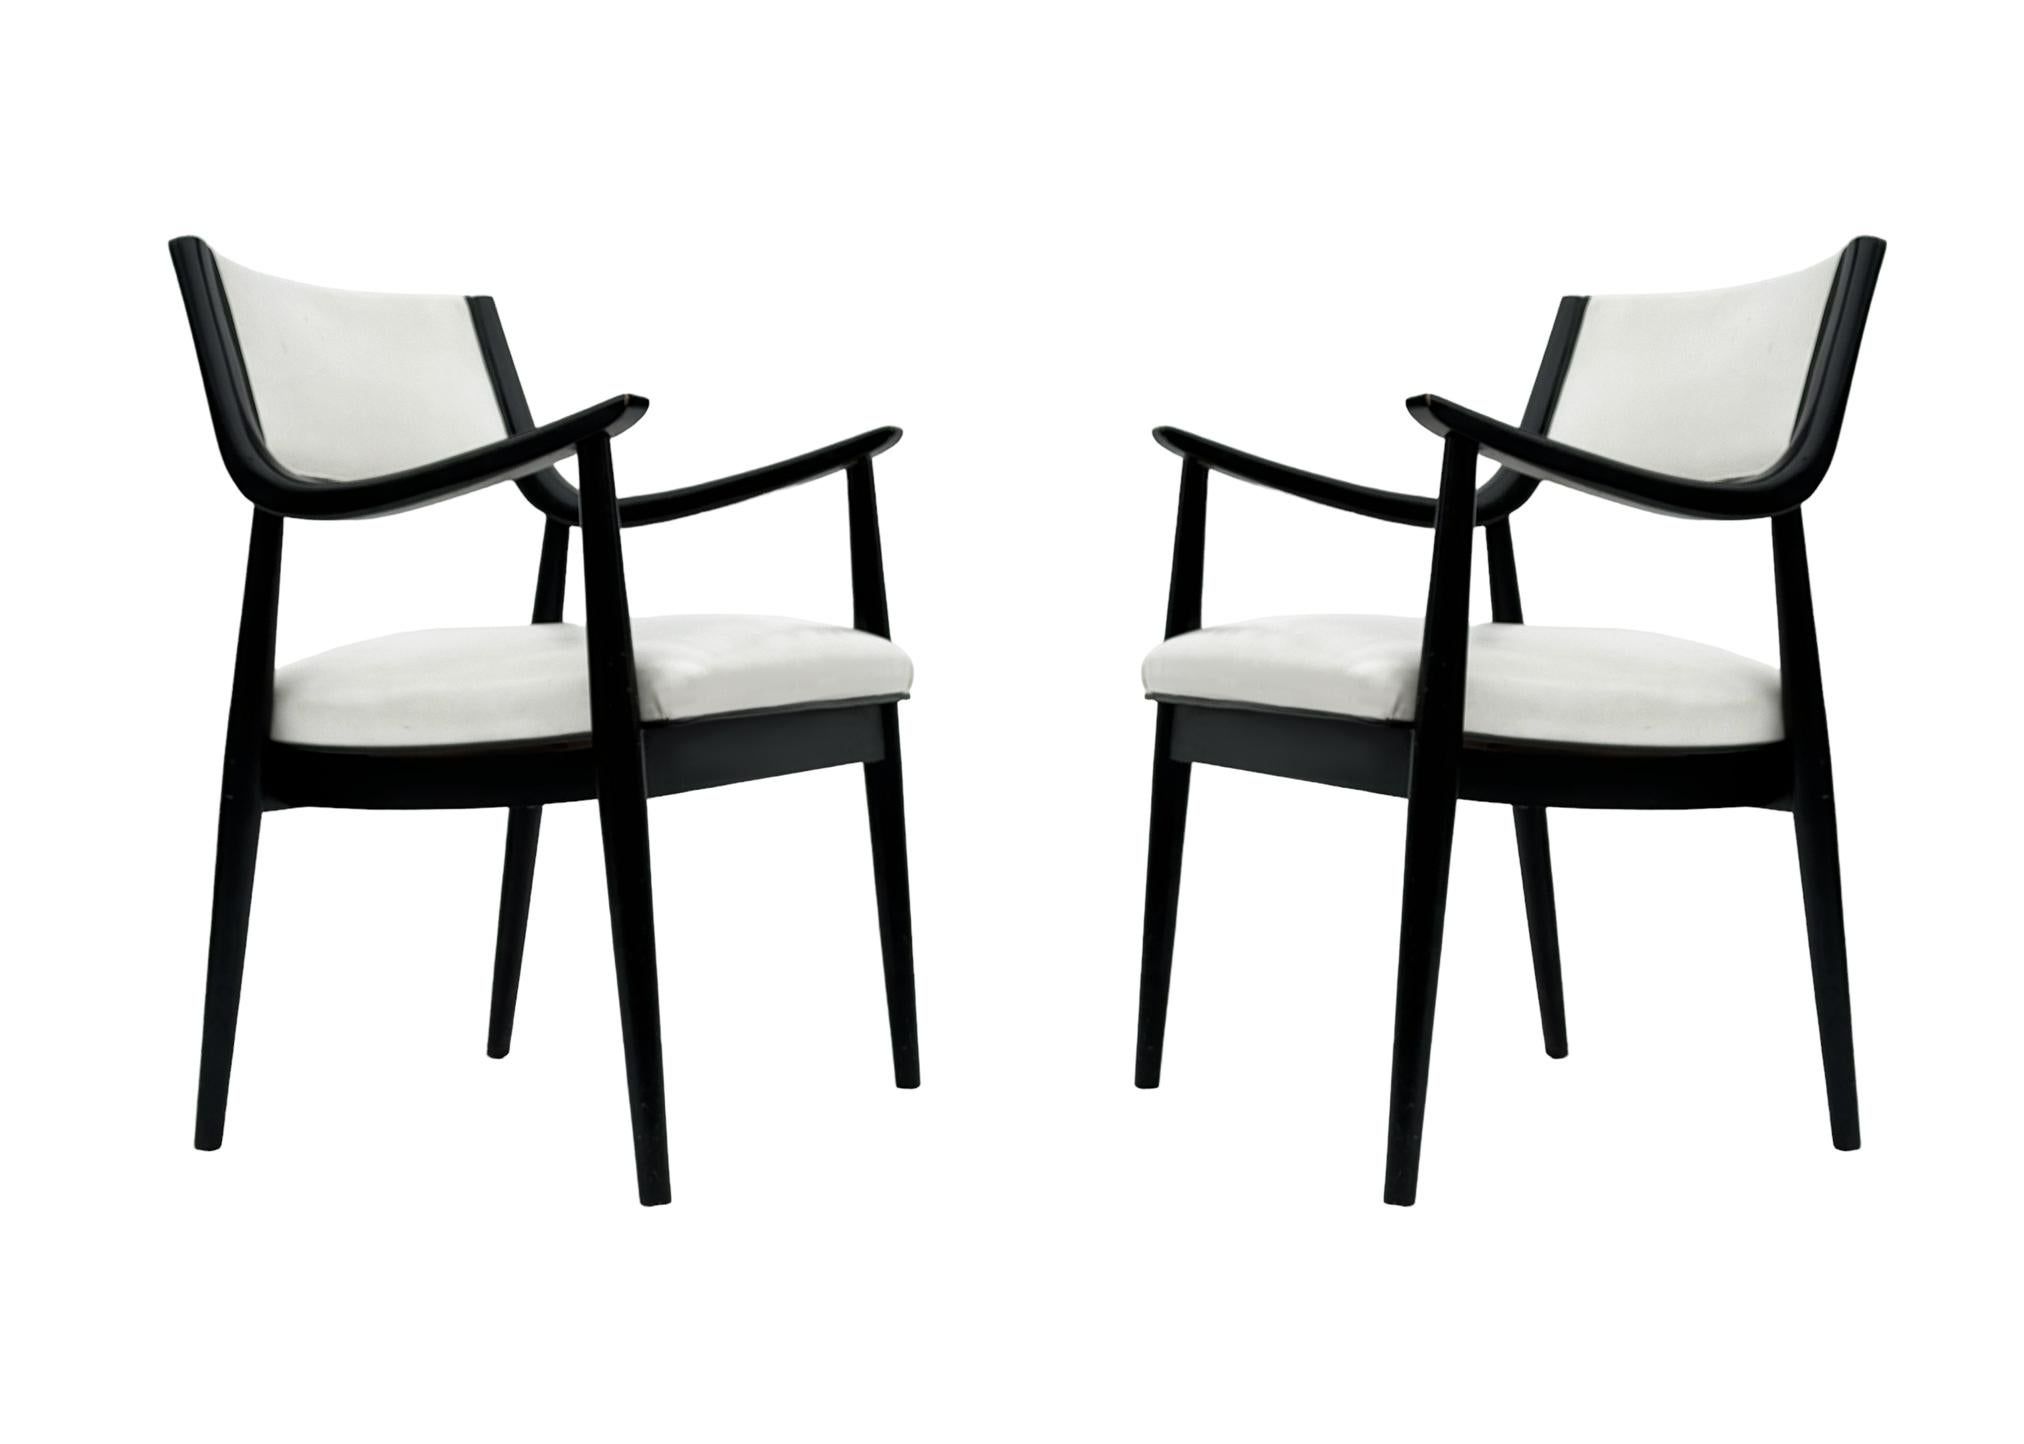 Pair of Mid-Century Modern Black Lacquer Danish Modern Style Armchairs in White For Sale 2